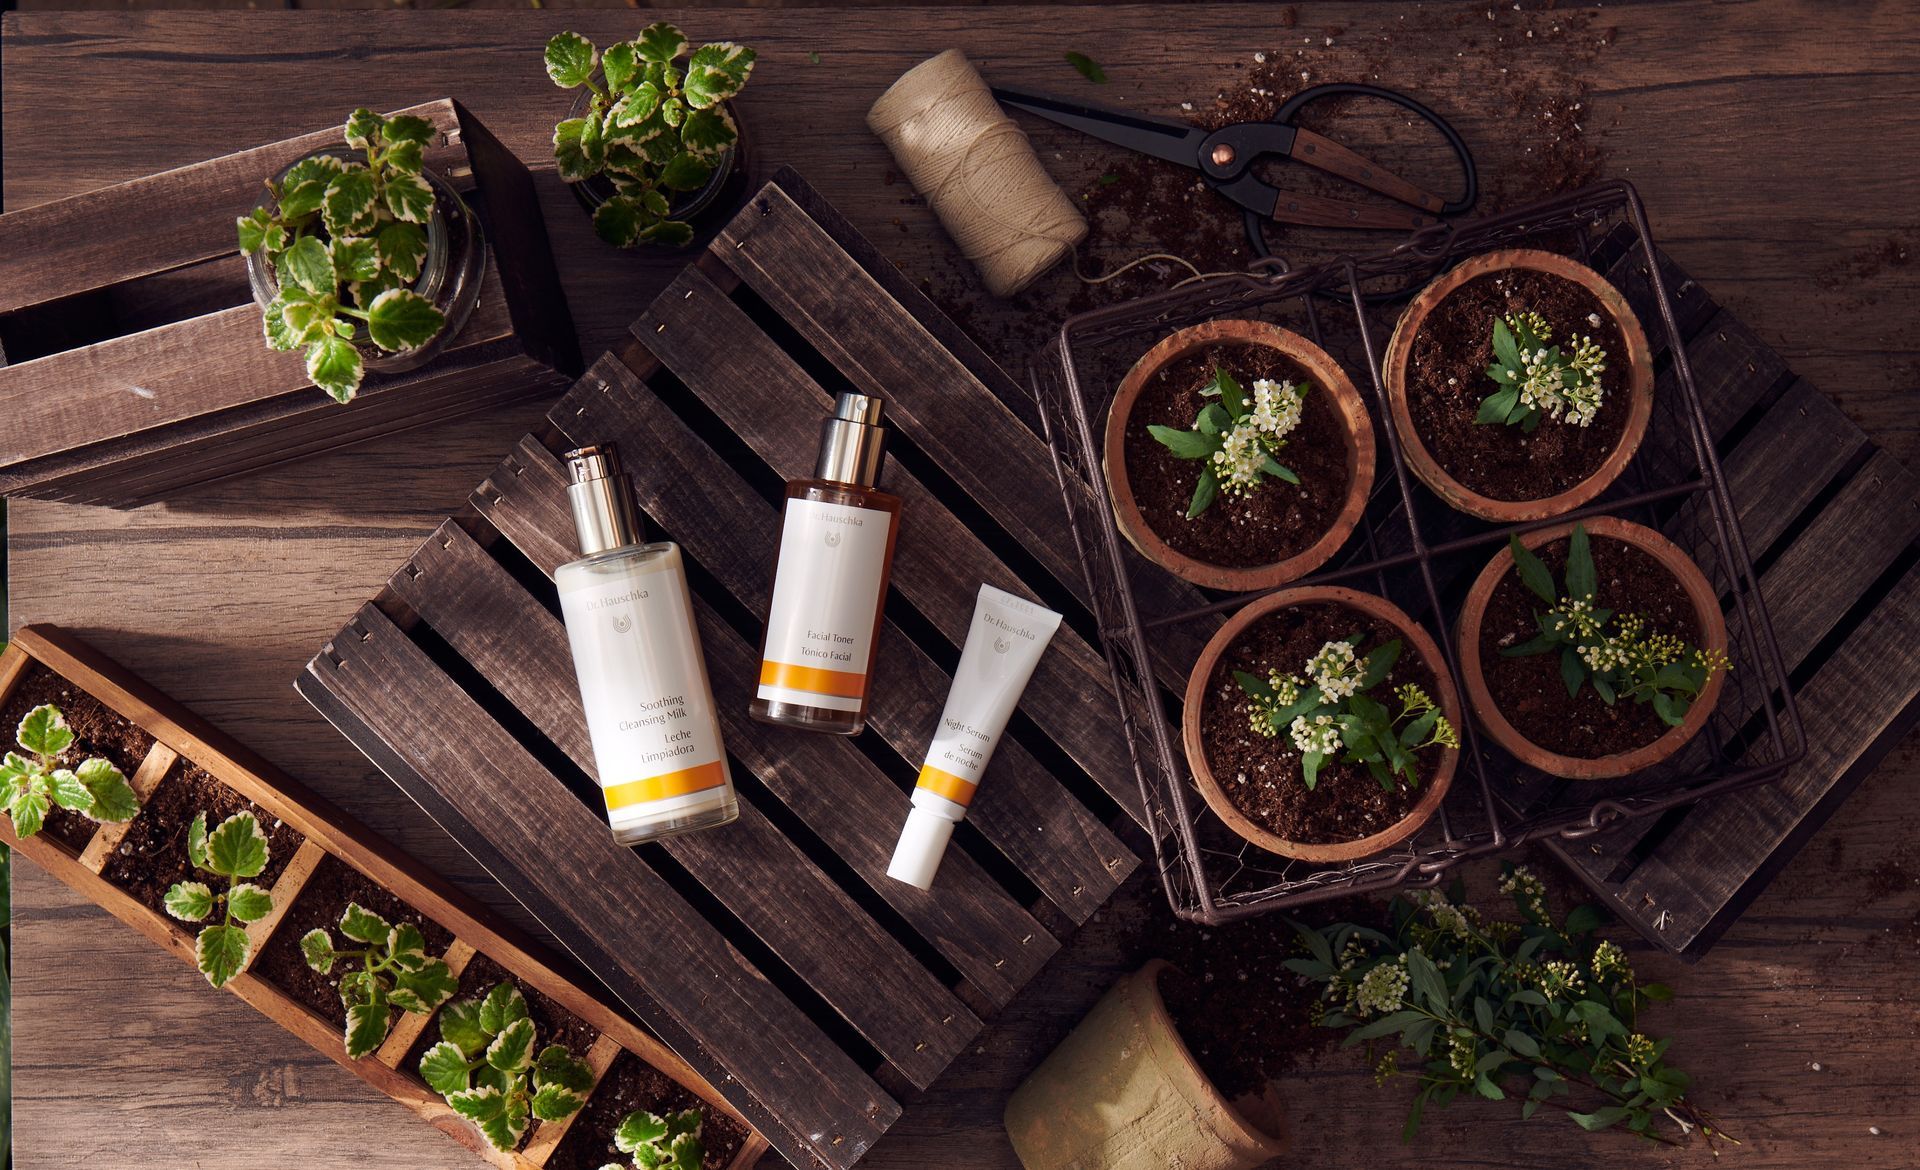 a bottle of dr. hauschka cosmetics sits on a wooden crate